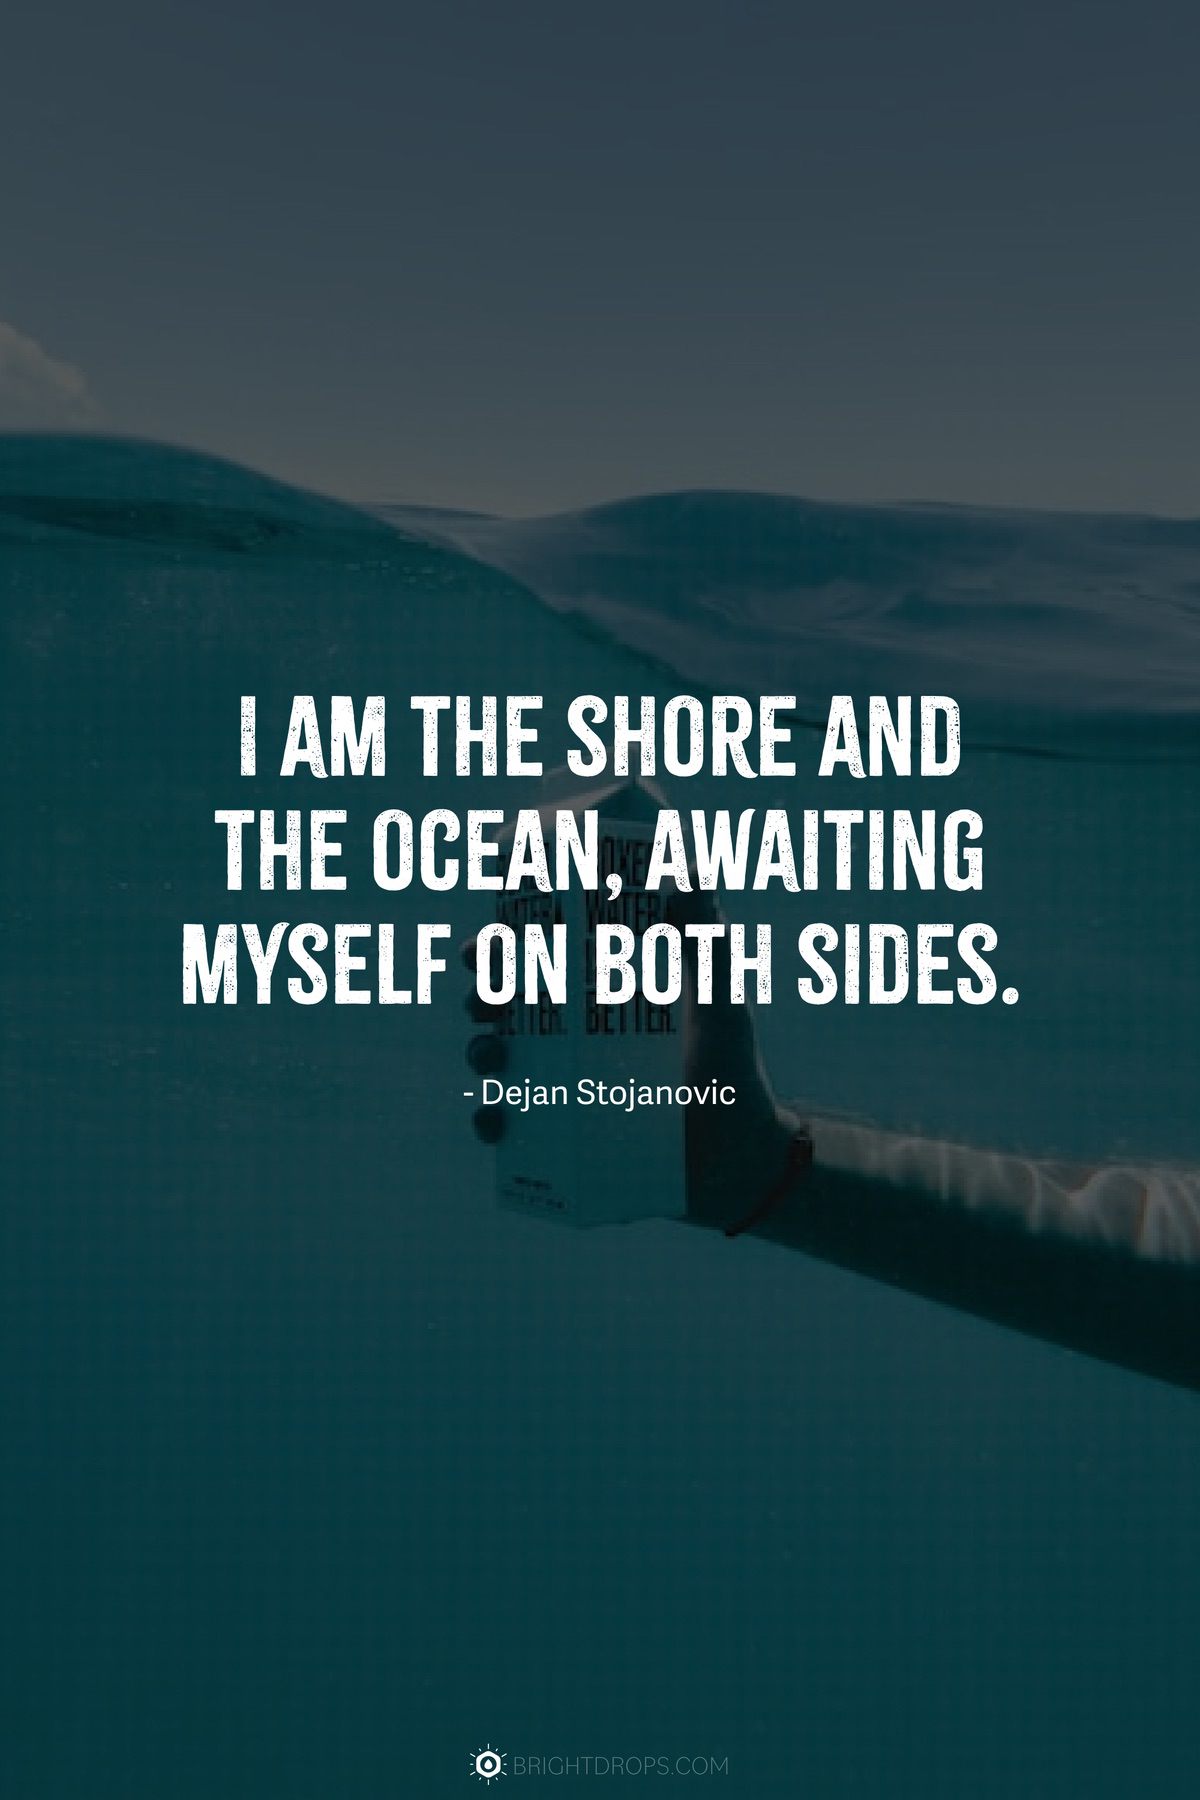 I am the shore and the ocean, awaiting myself on both sides.